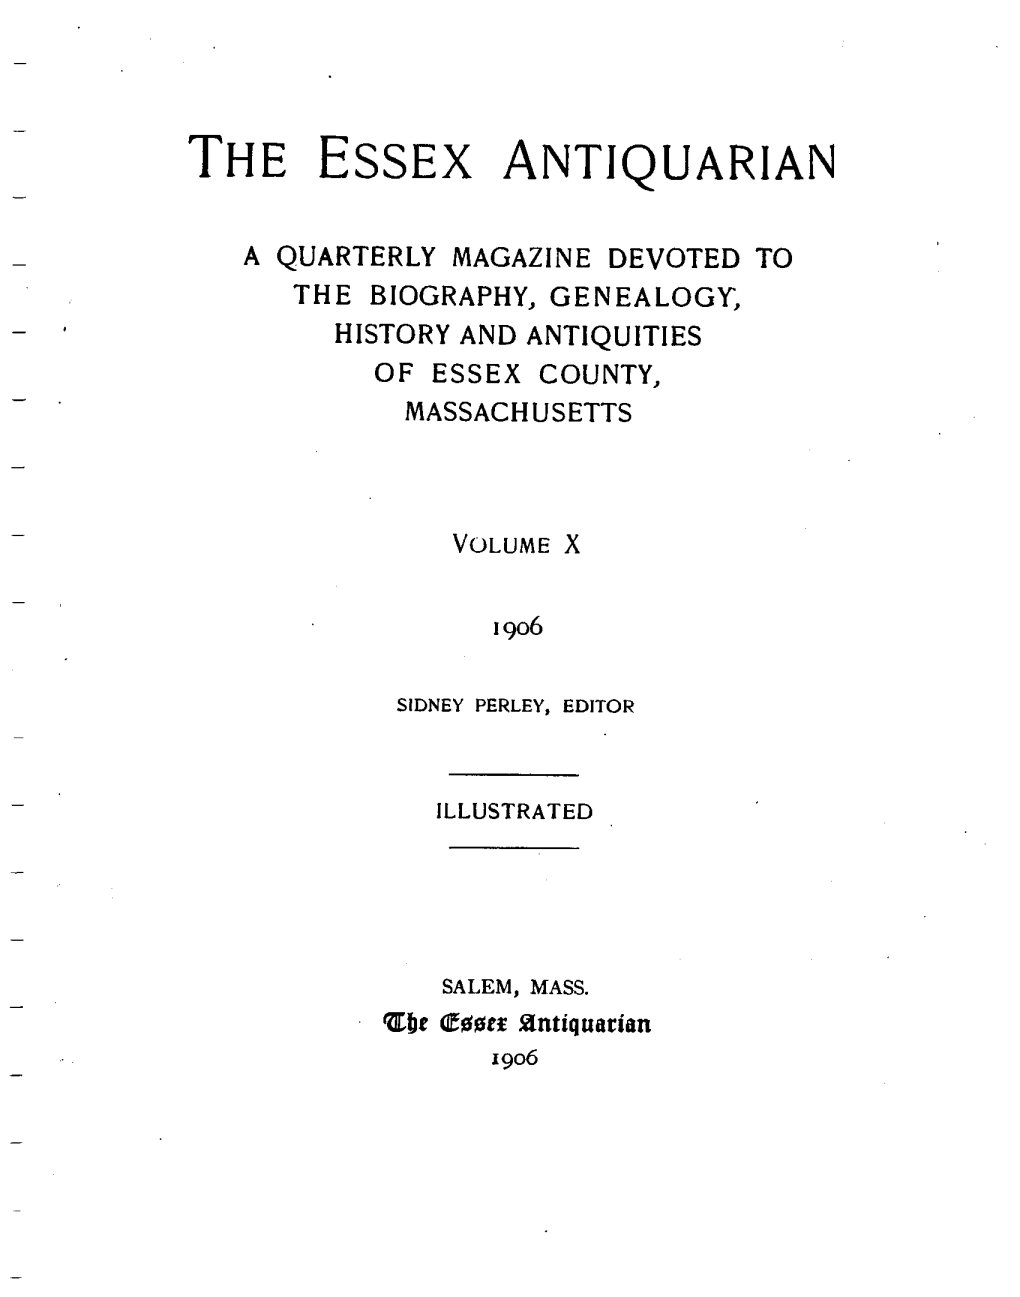 The Biography, Genealogy, History and Antiquities of Essex County, Massachusetts